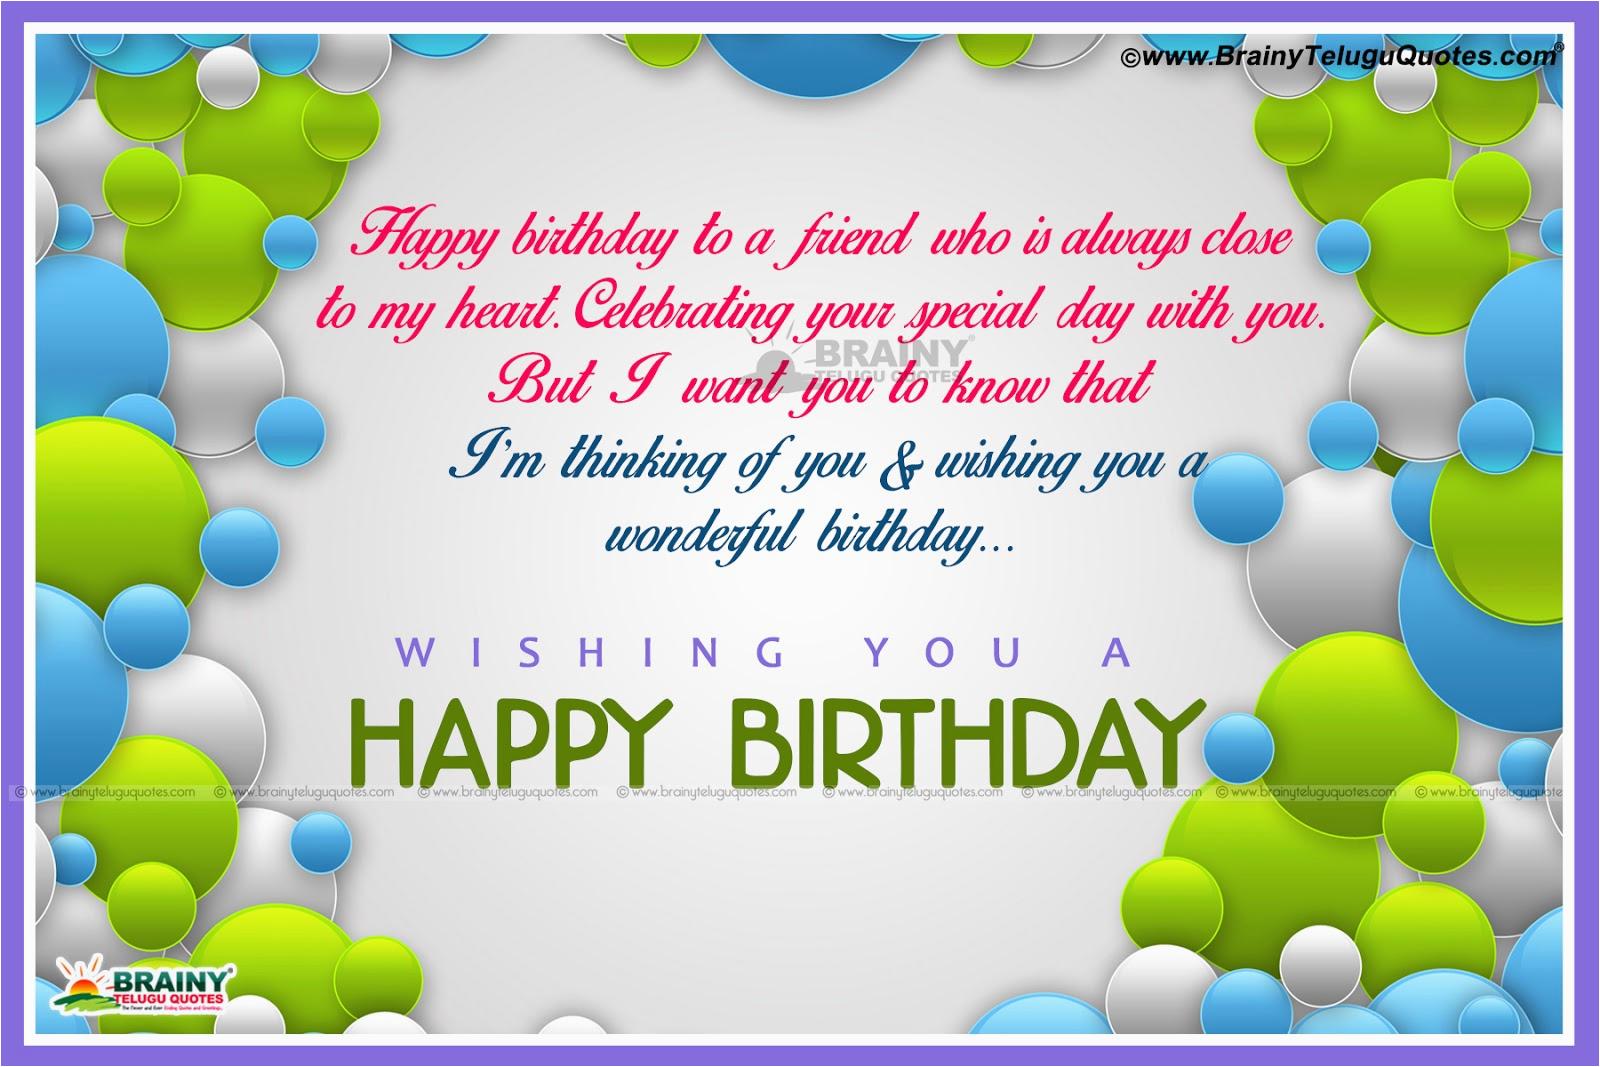 best friend birthday wishes quotes messages images greeting cards